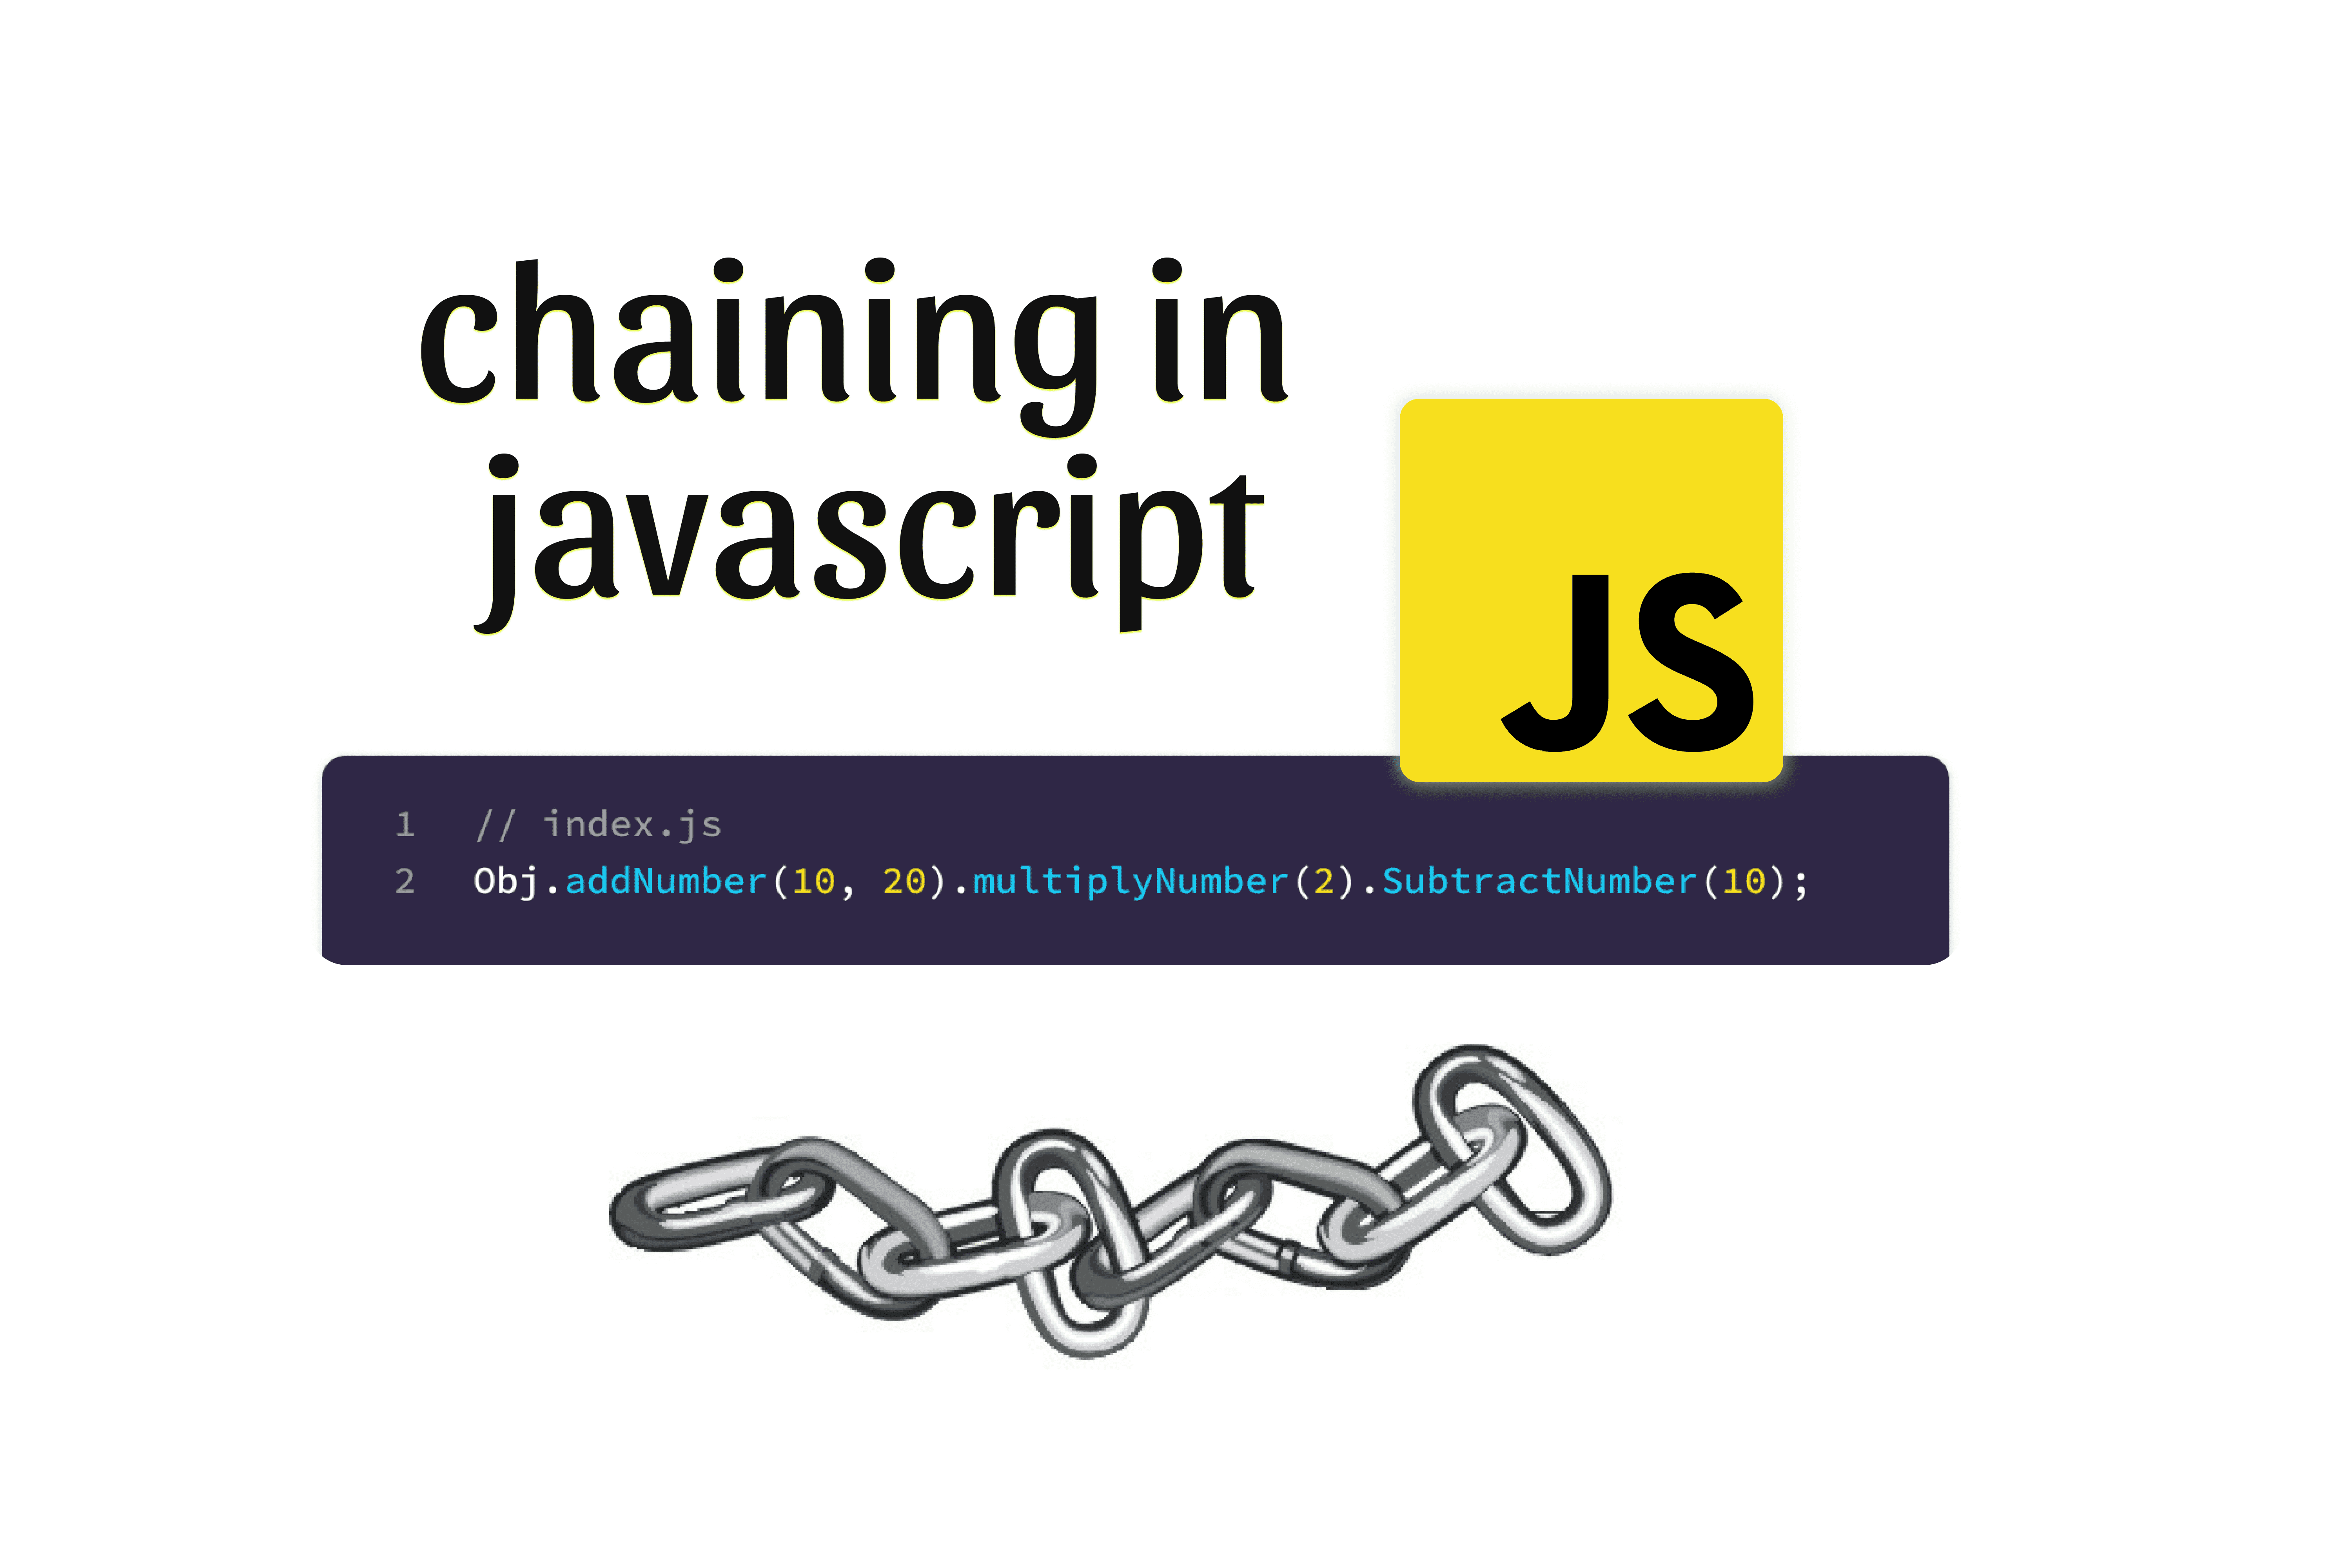 What is chaining in javascript